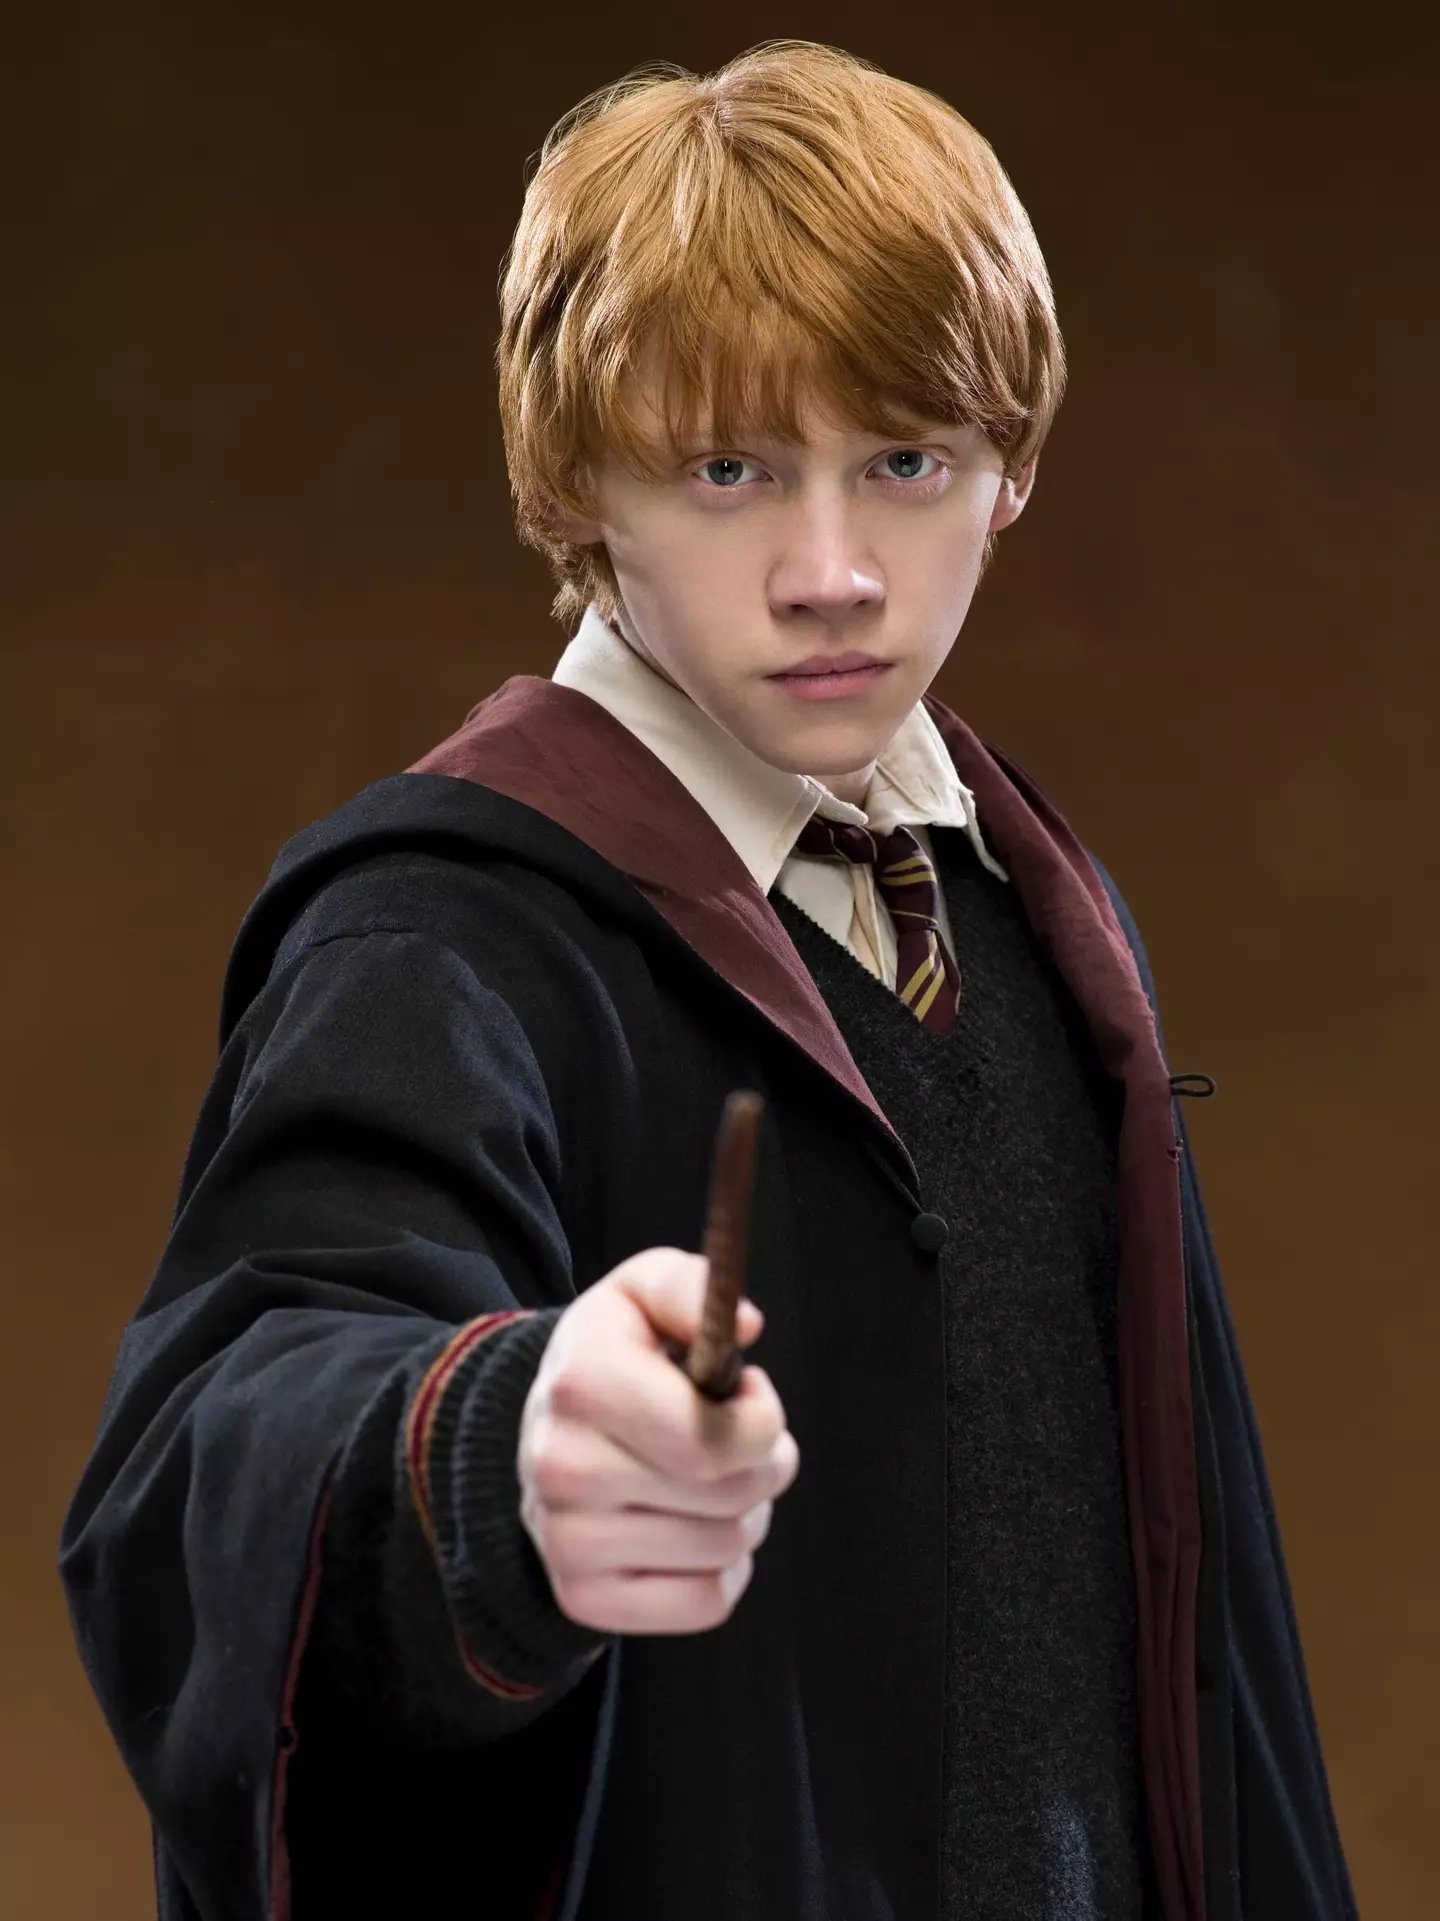 Rupert Grint says his daughter already has her own Hogwarts robe.